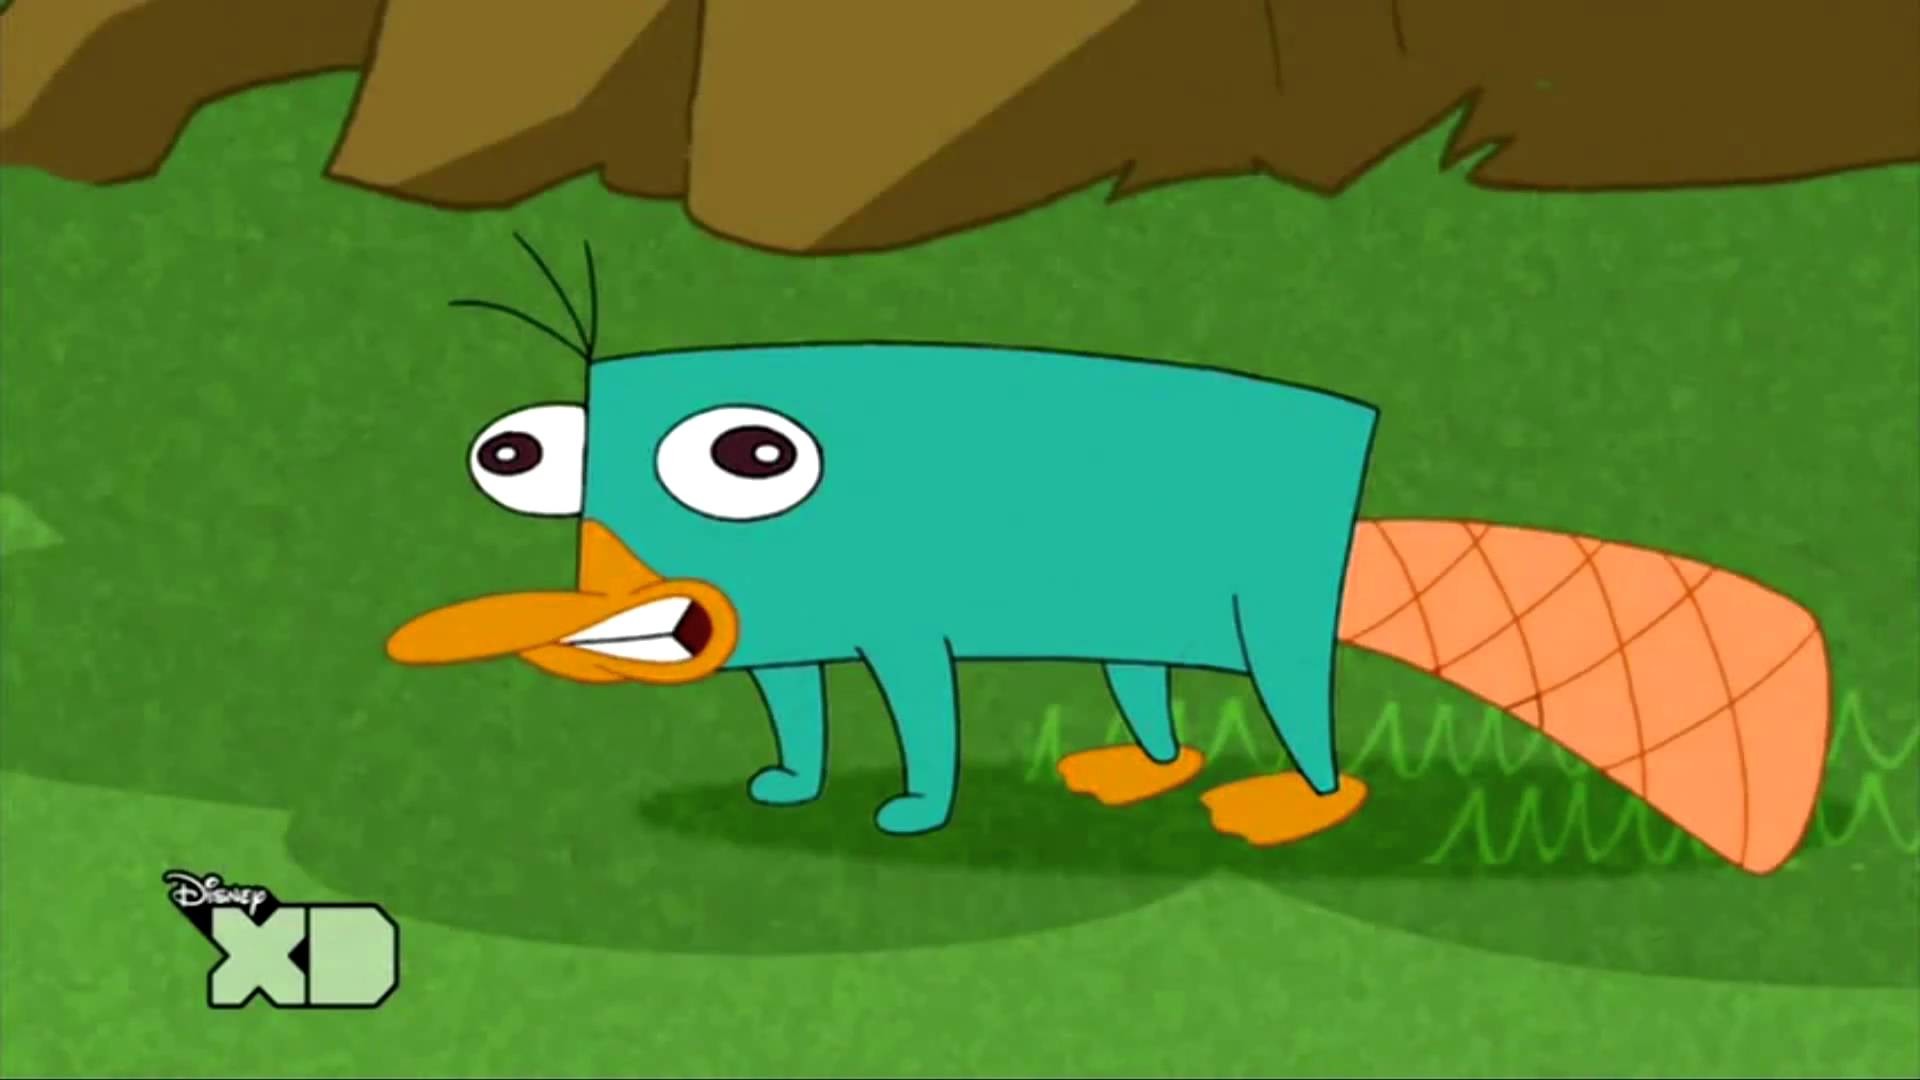 Perry the platypus iphonewallpaper  Perry the platypus Funny iphone  wallpaper Phineas and ferb